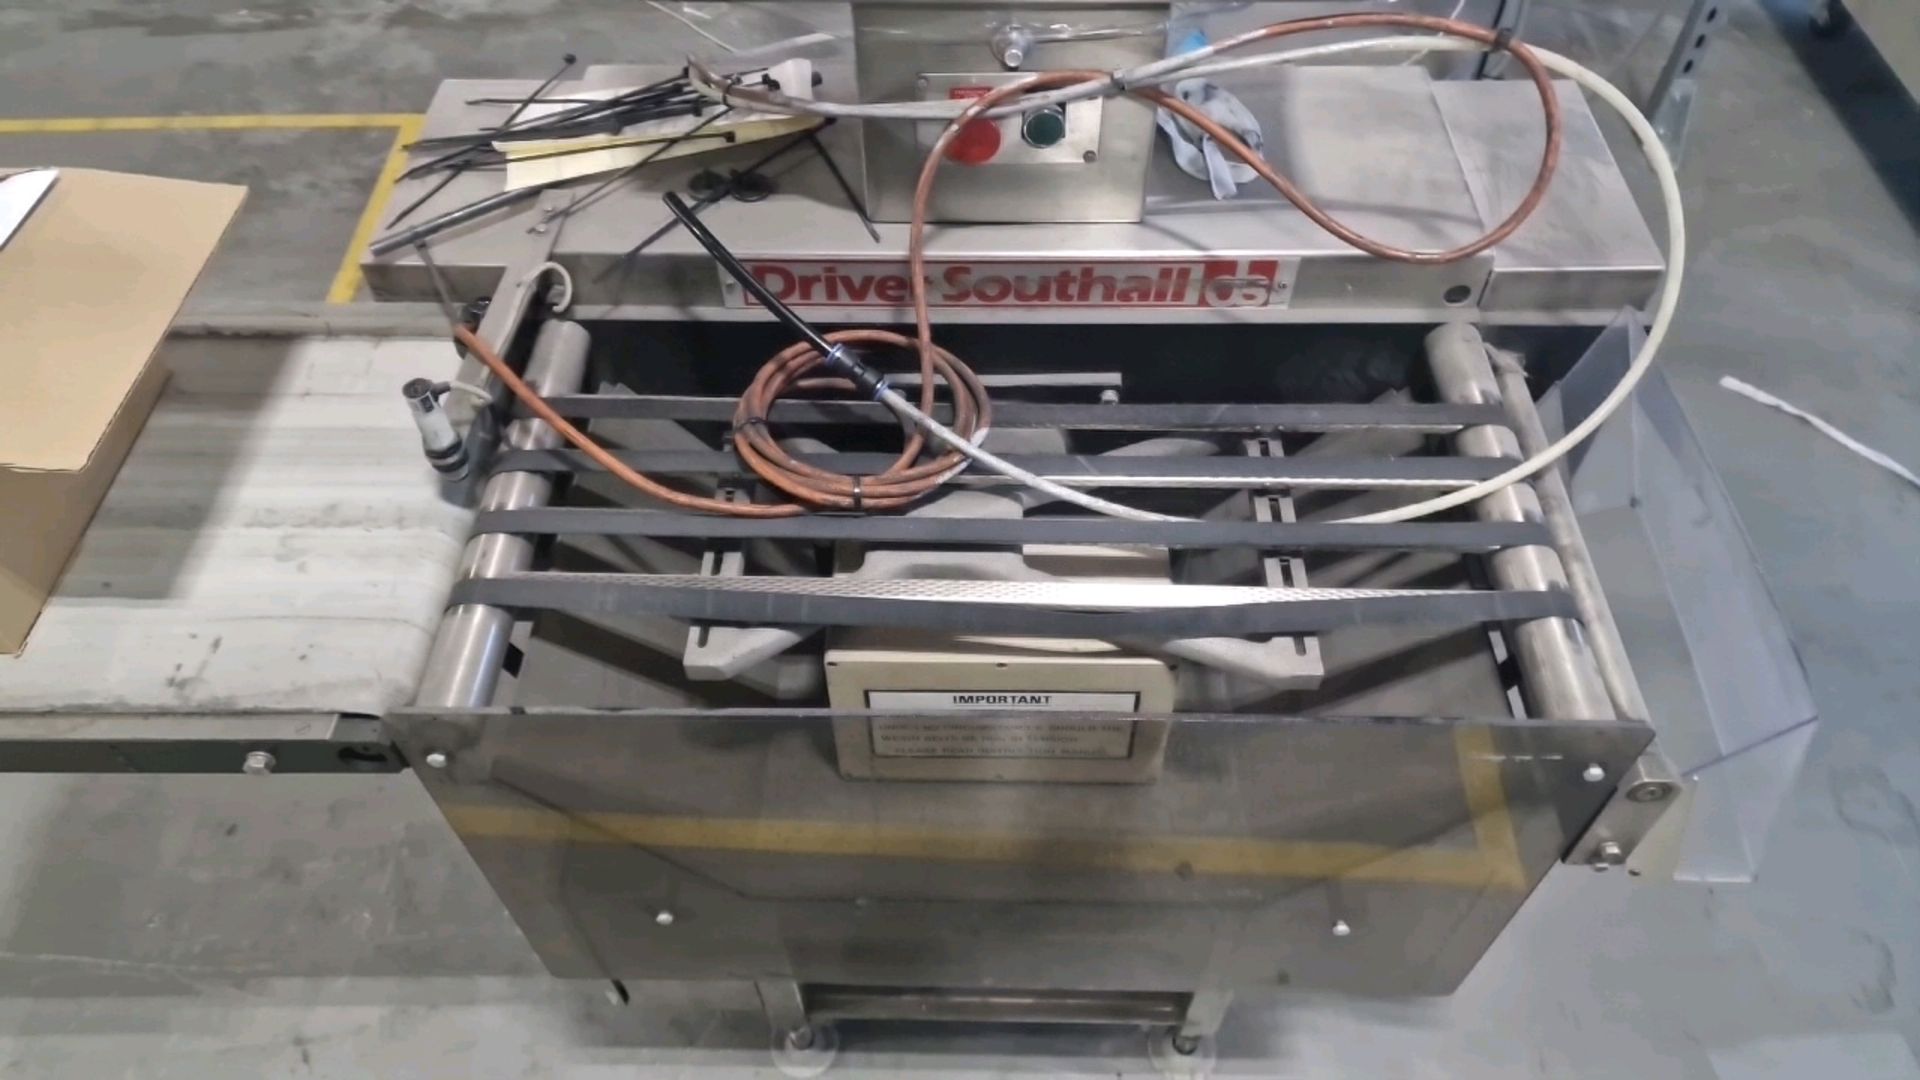 Driver Southall Check Weigher - Image 3 of 6